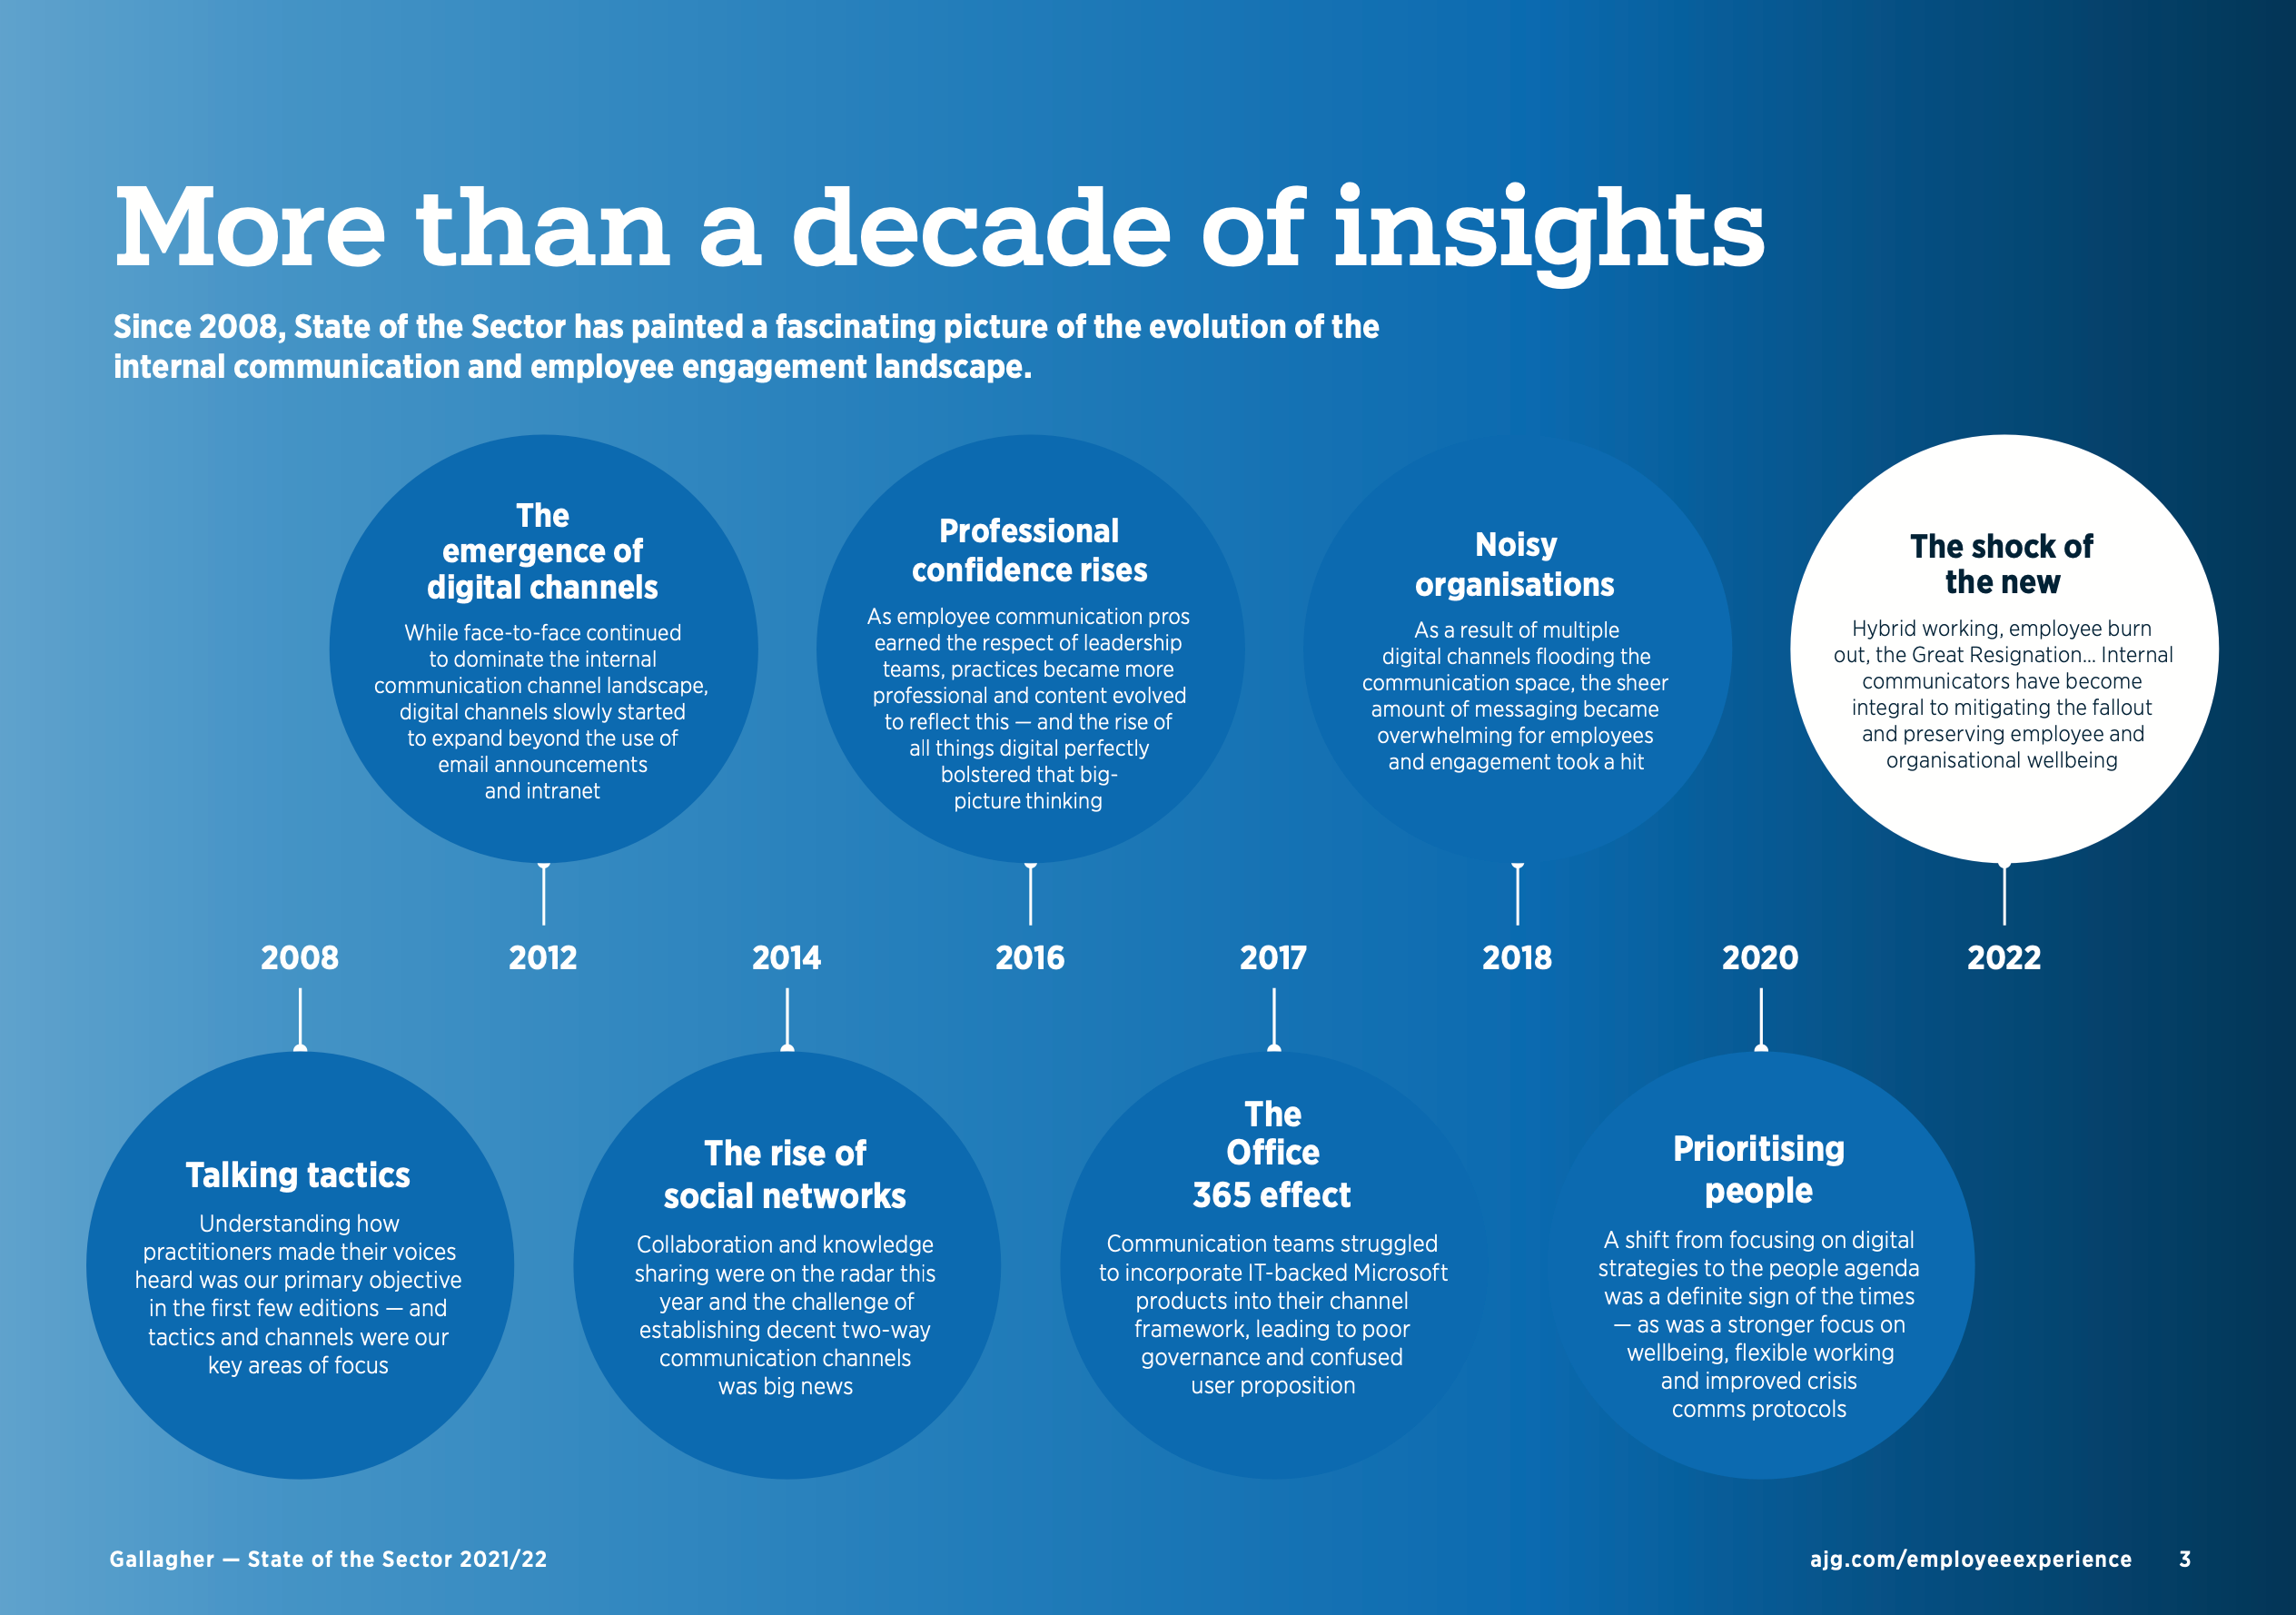 Image showing more than a decade of insights 